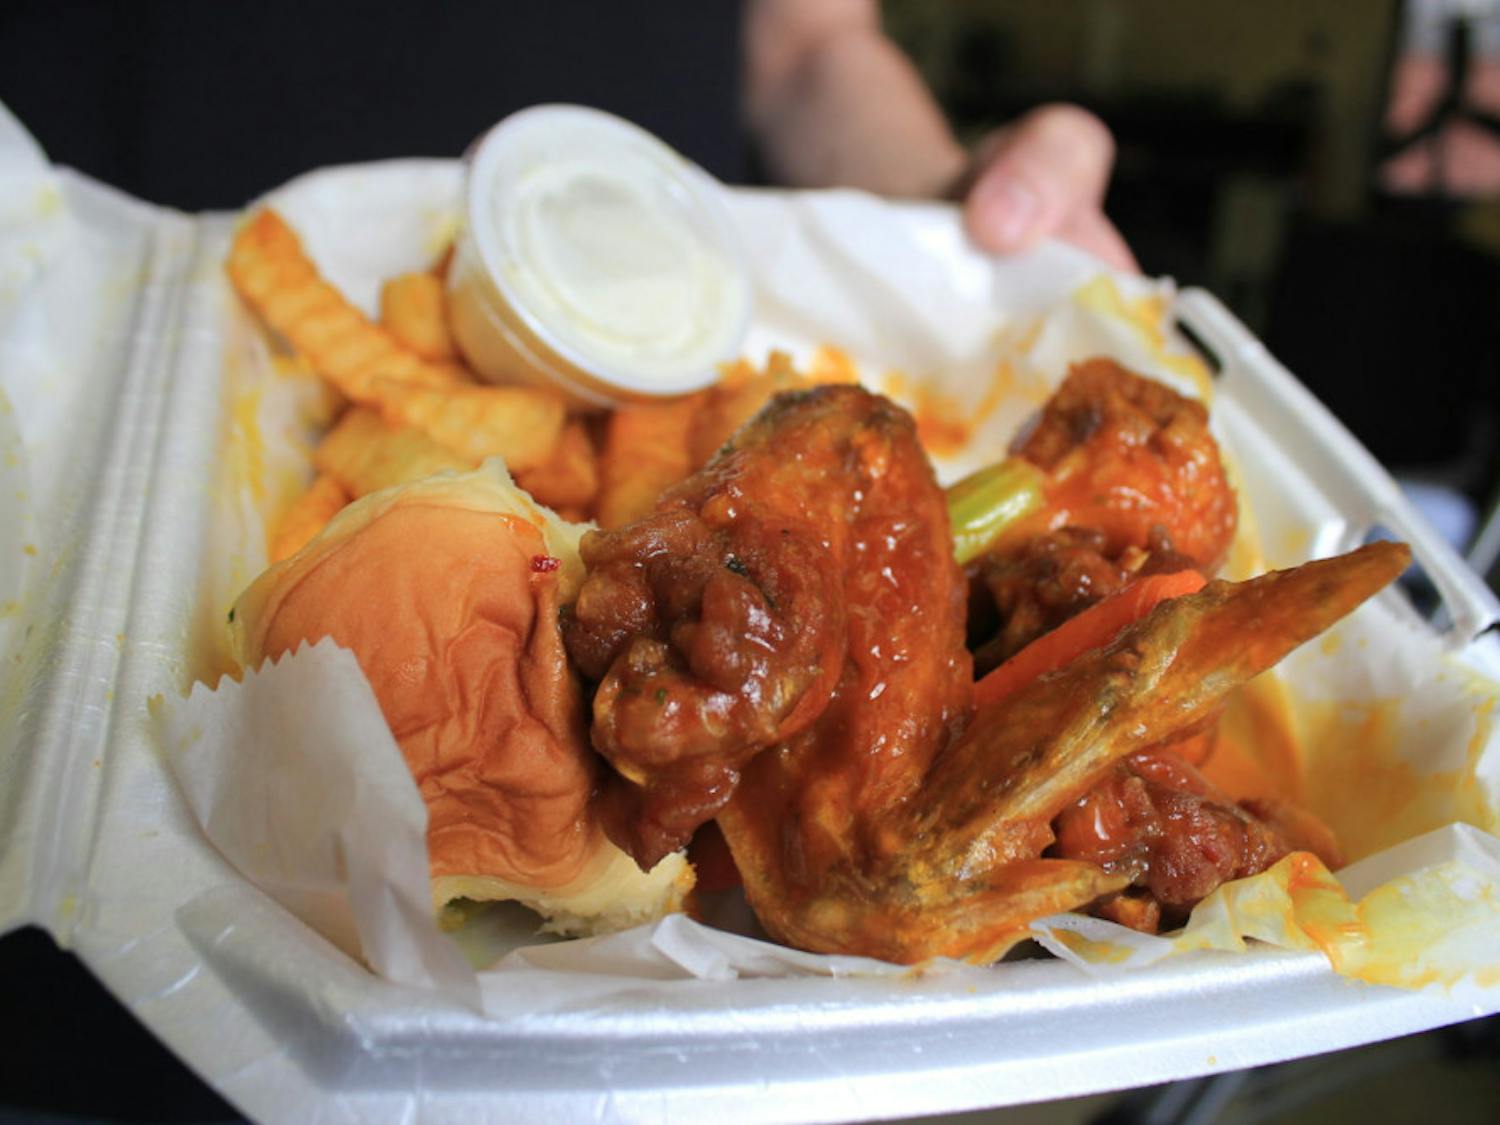 Ching's: Best Wings voted by the university students